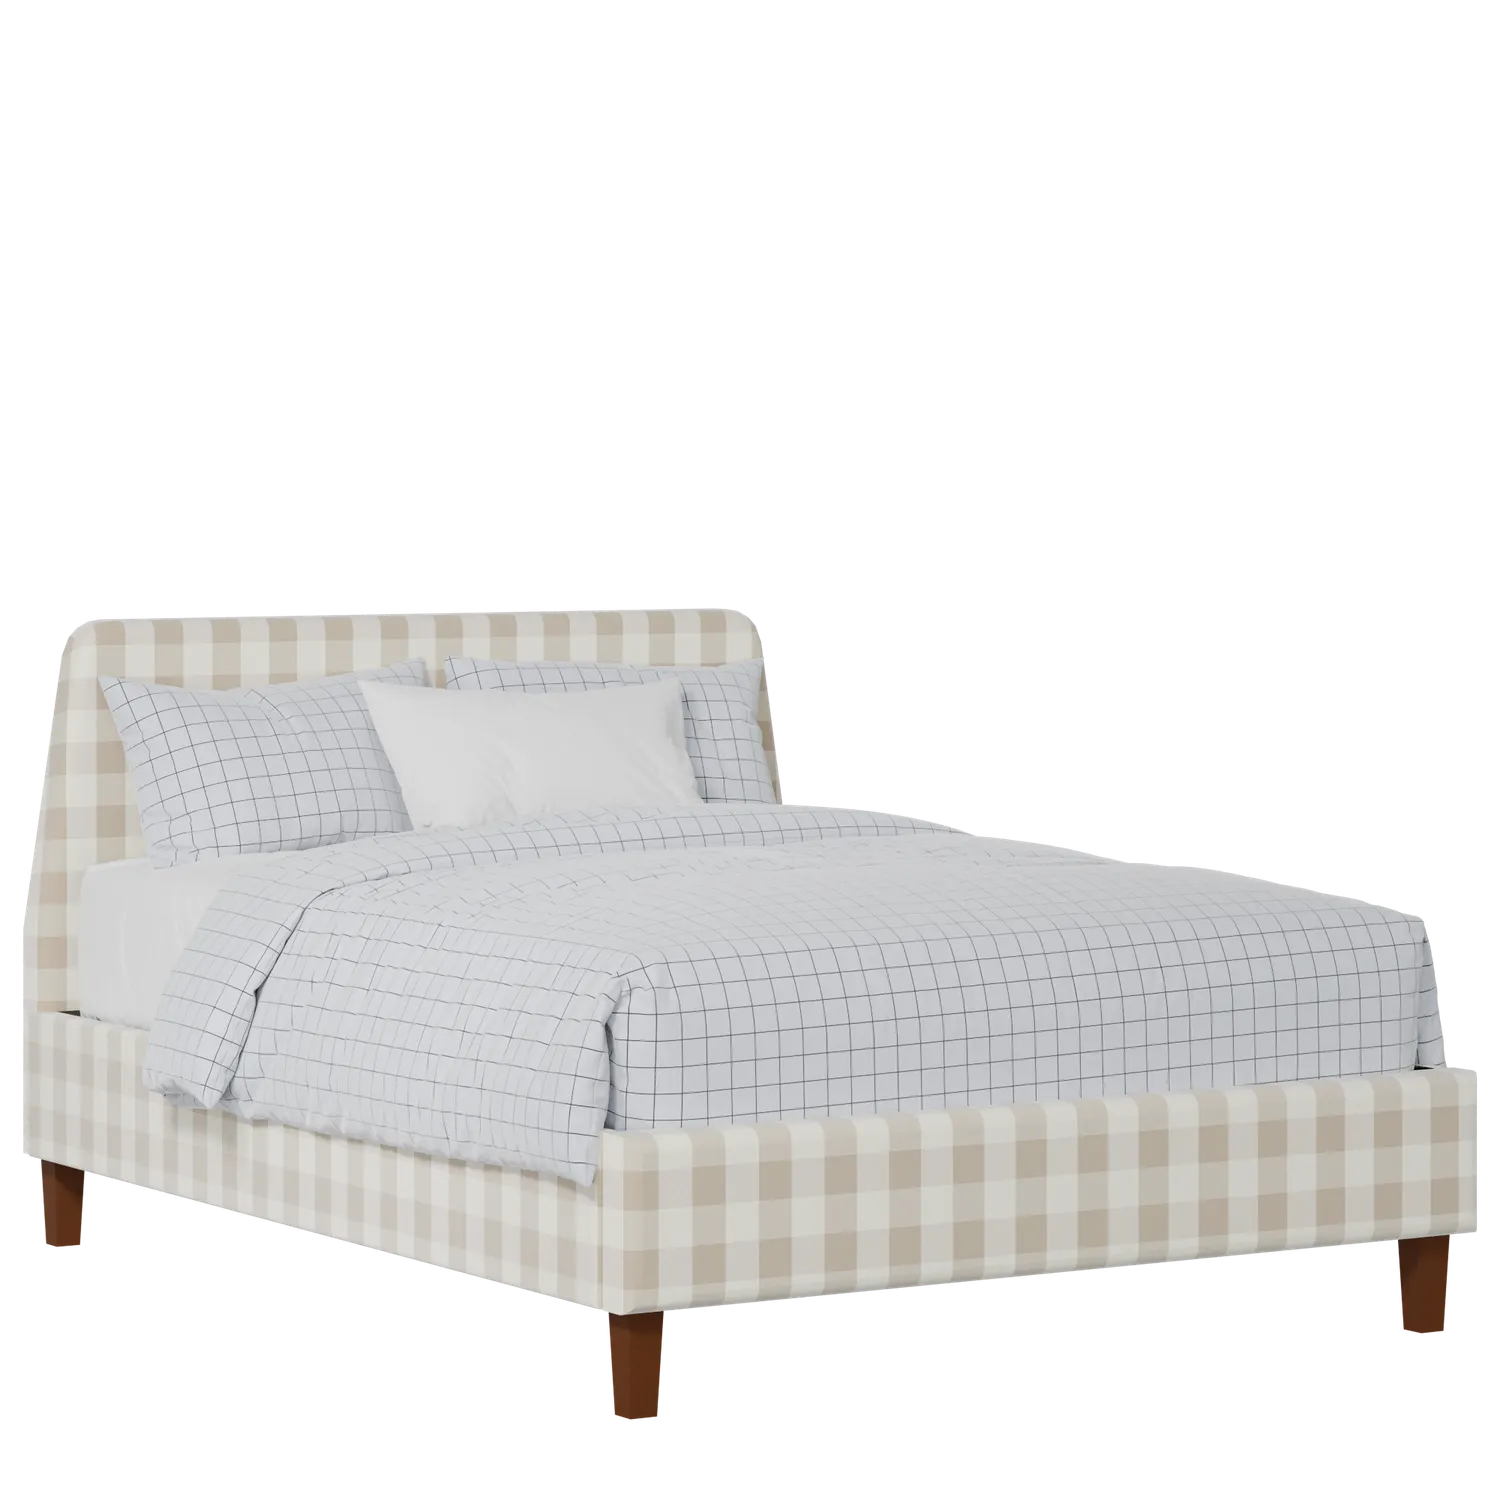 Hanwell Slim upholstered bed in Romo Kemble Putty fabric with Juno mattress